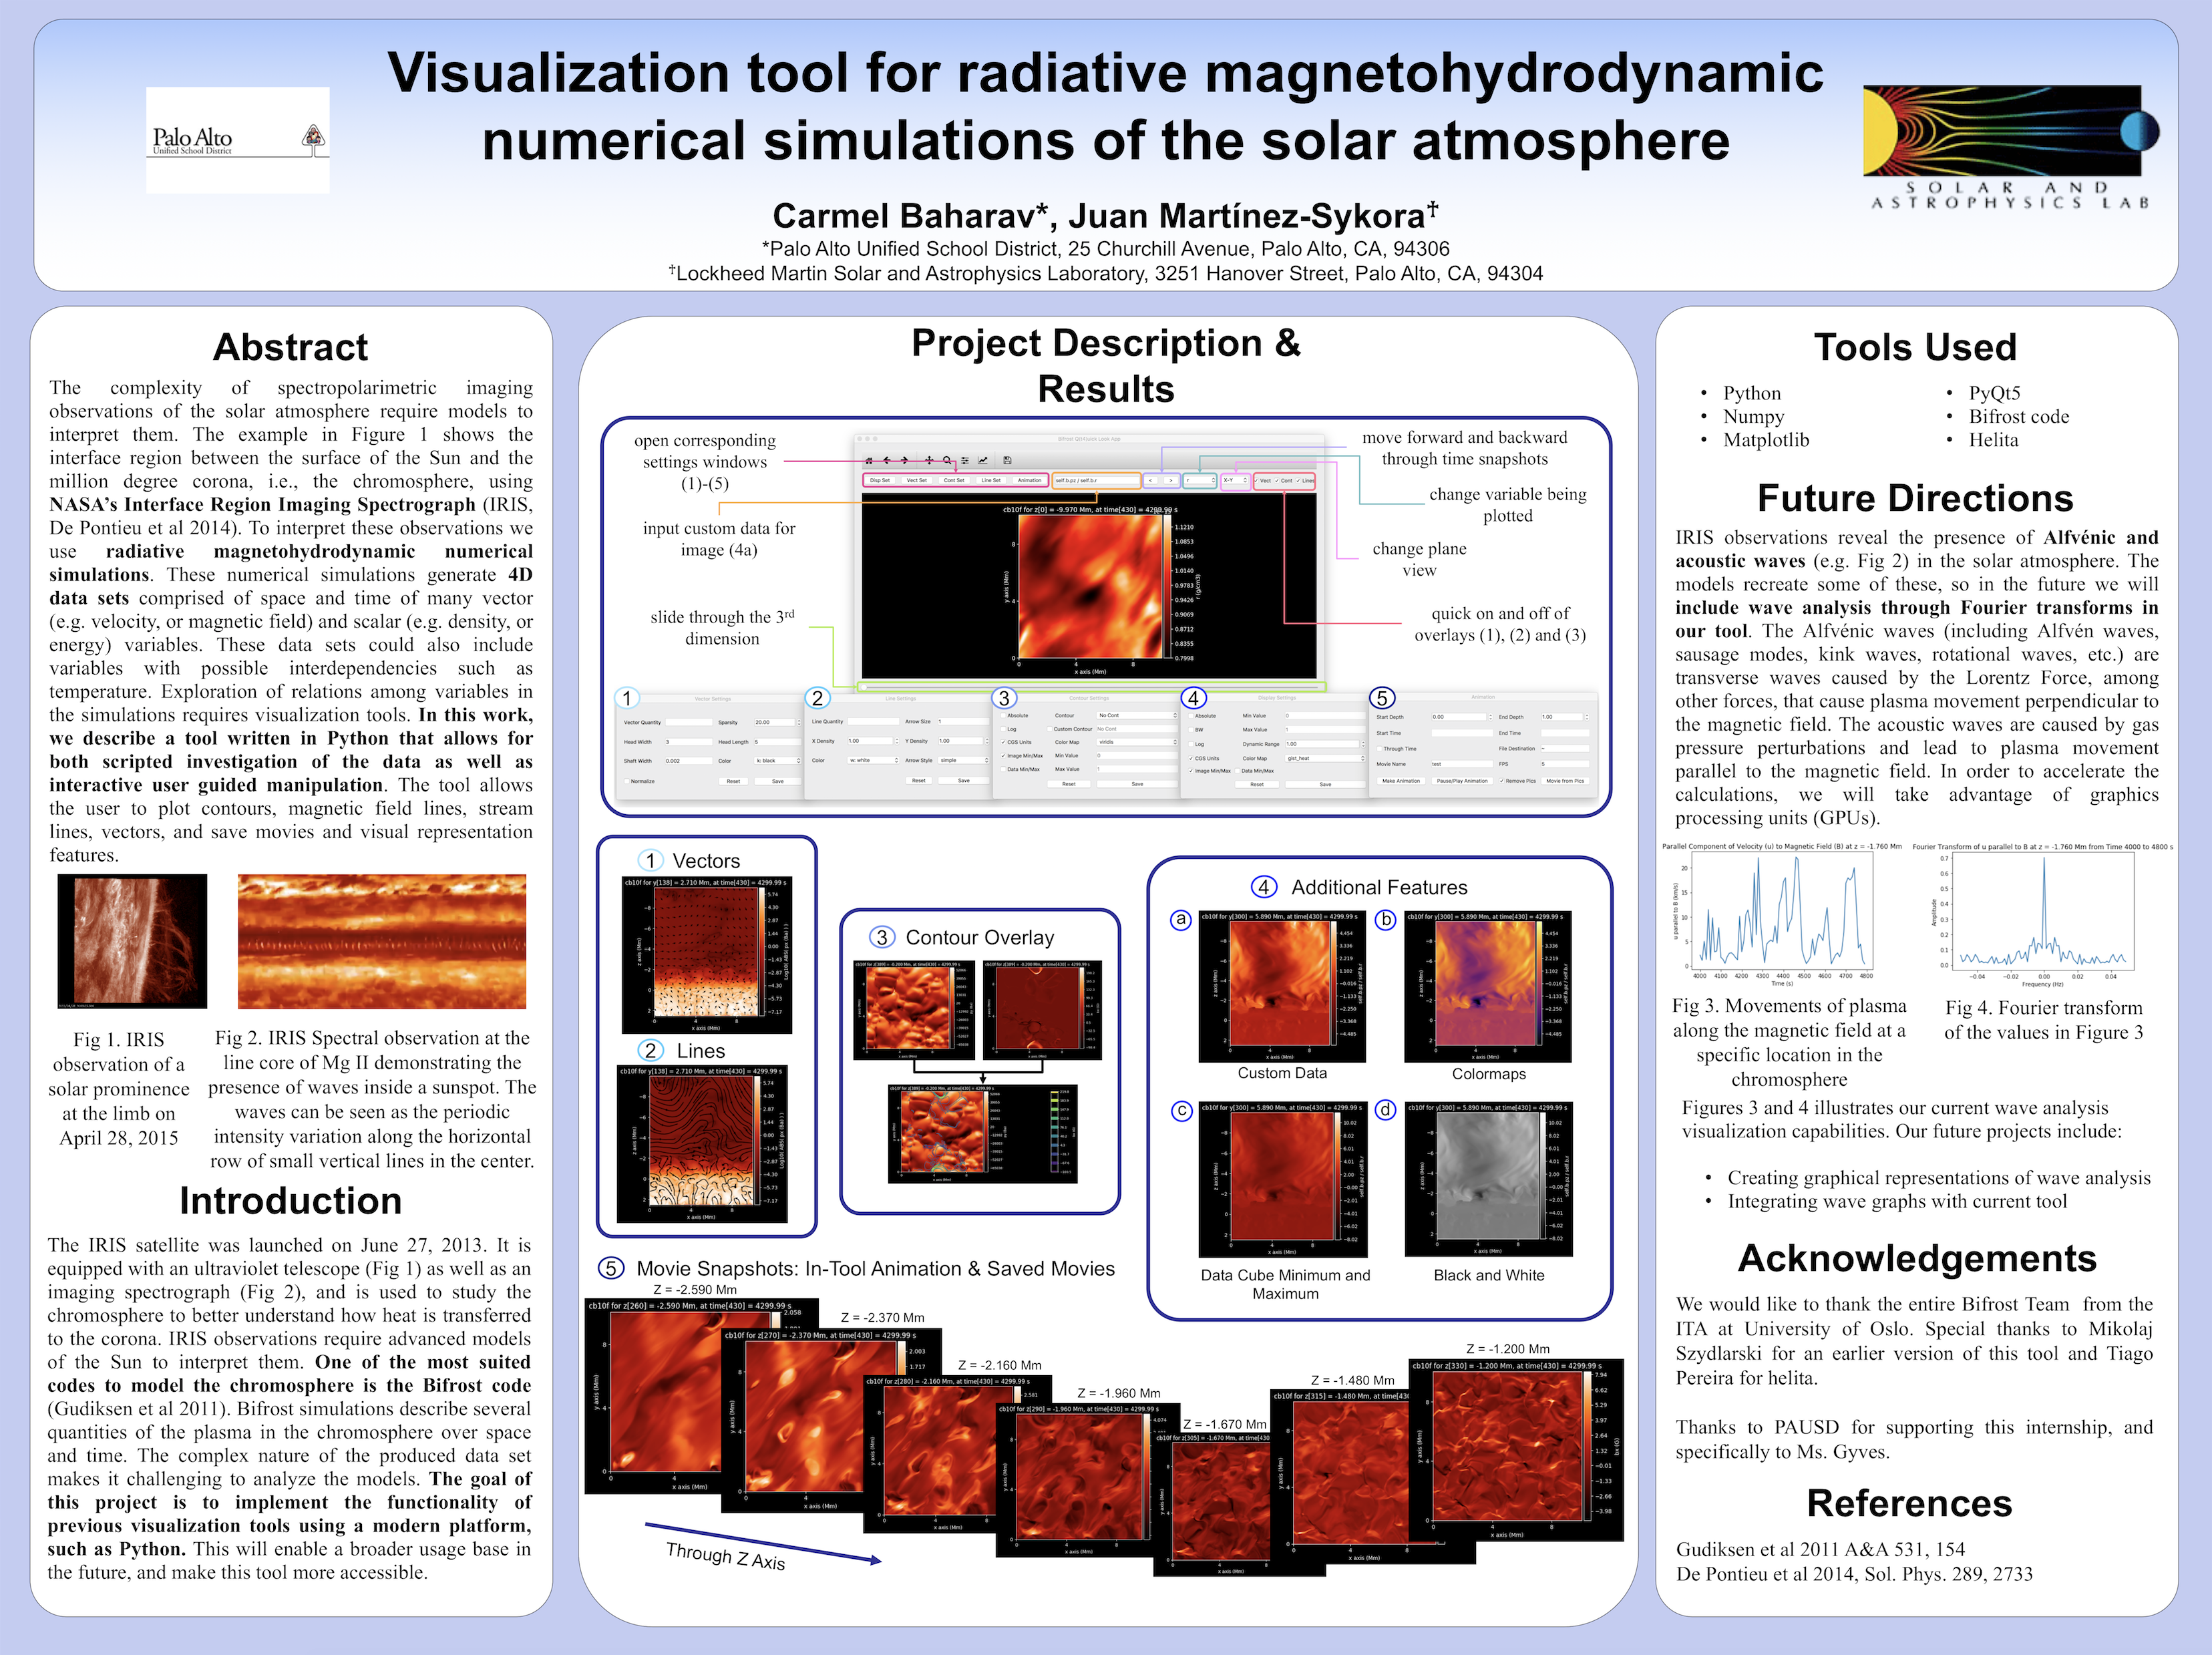 _images/AGU_poster.png